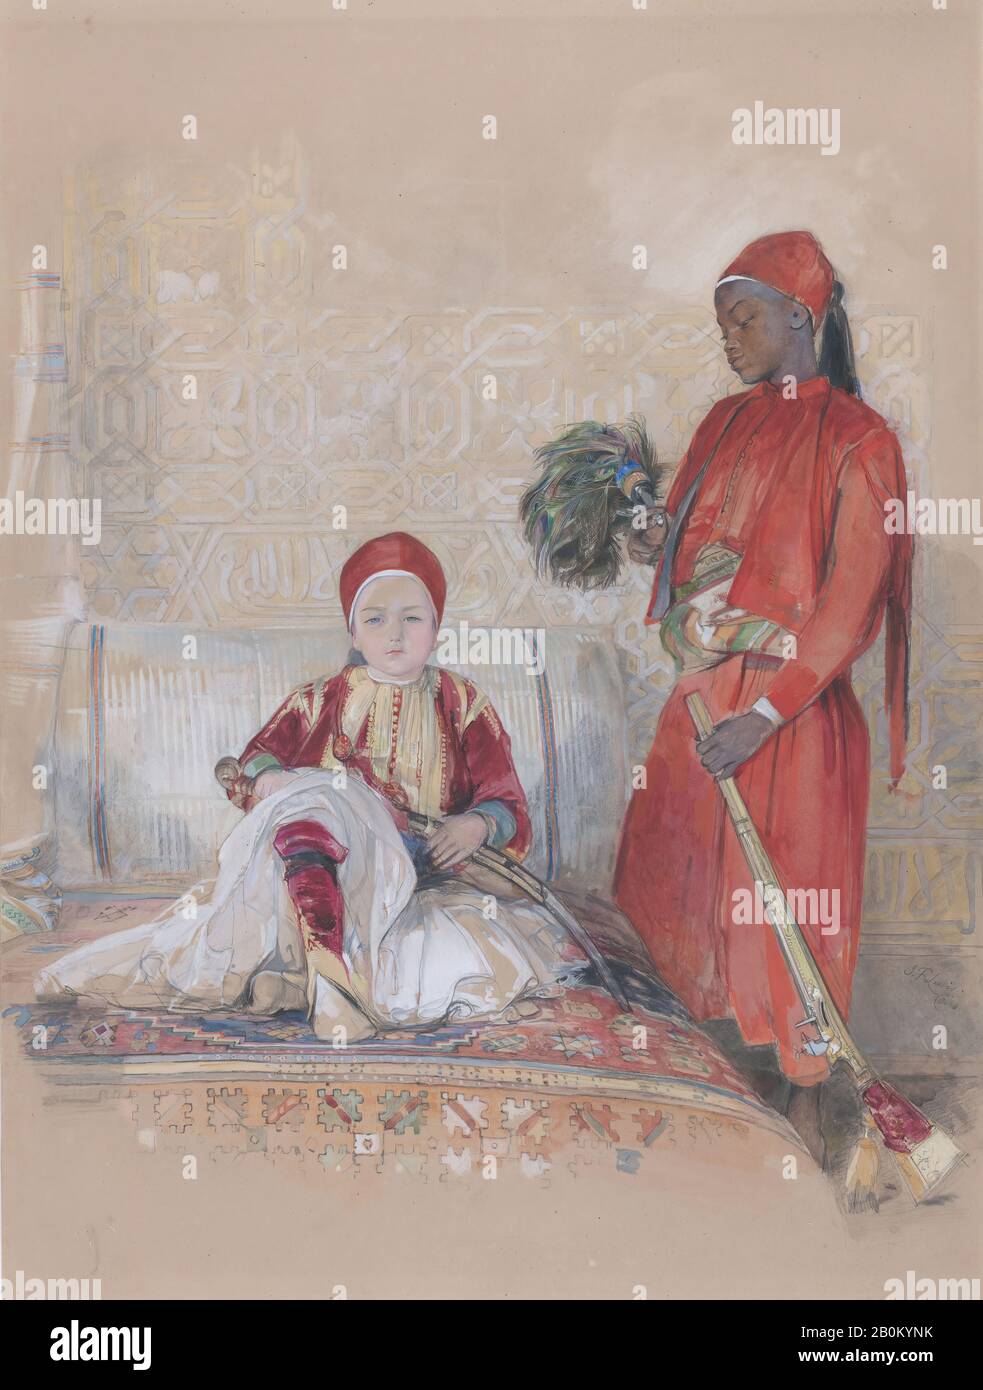 John Frederick Lewis, Iskander Bey and his Servant, John Frederick Lewis (British, London 1804–1876 Walton-on-Thames), Iskandar Bey (Mohamed el Mahdy) (Egyptian, born 1836), ca. 1848, Watercolor and bodycolor over graphite, Sheet: 20 in. × 14 1/2 in. (50.8 × 36.8 cm), Drawings Stock Photo